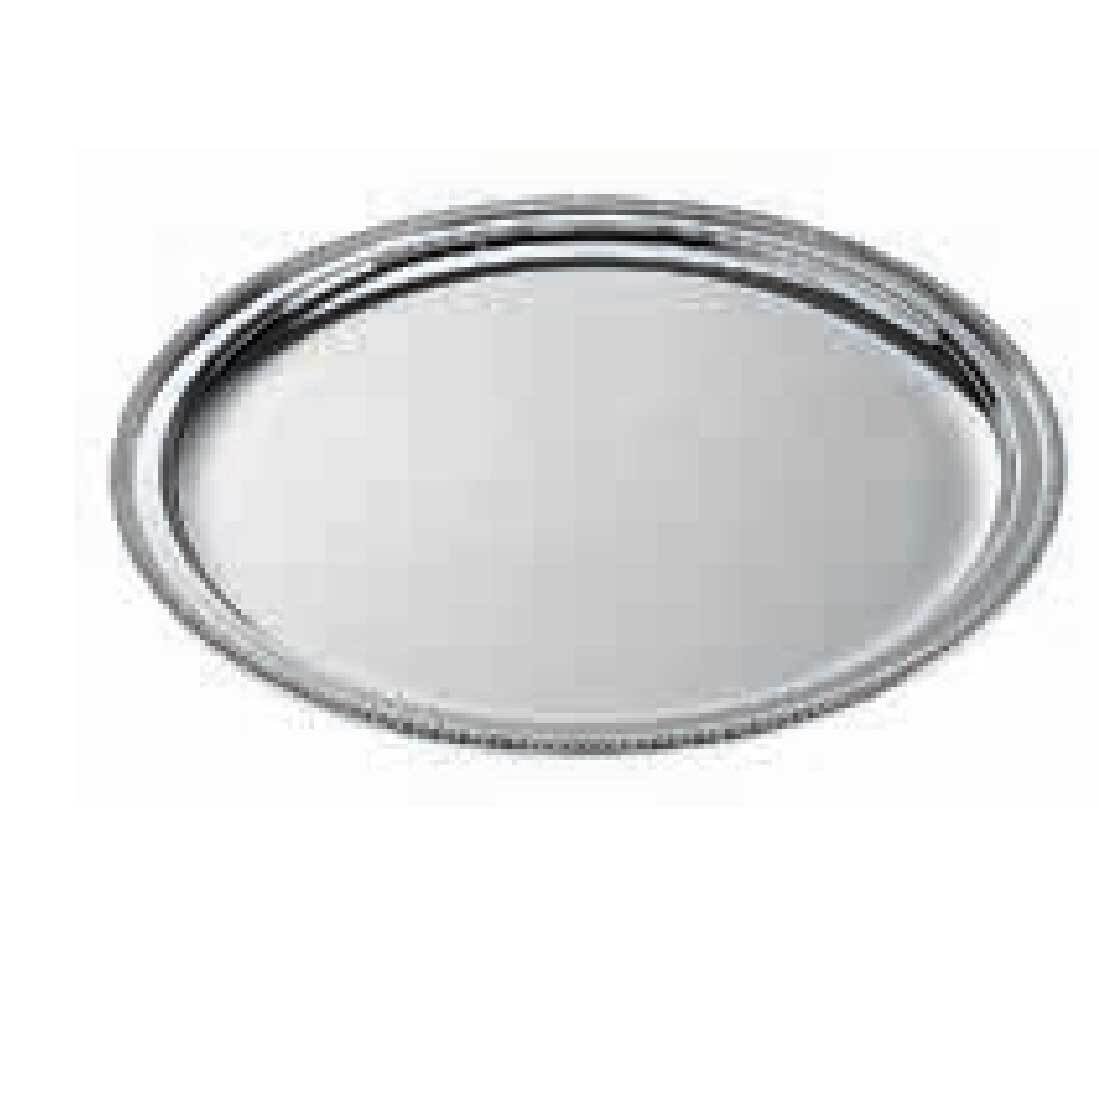 Ercuis Jonc Round Tray 16.125 Inch Silver Plated F51J460-41